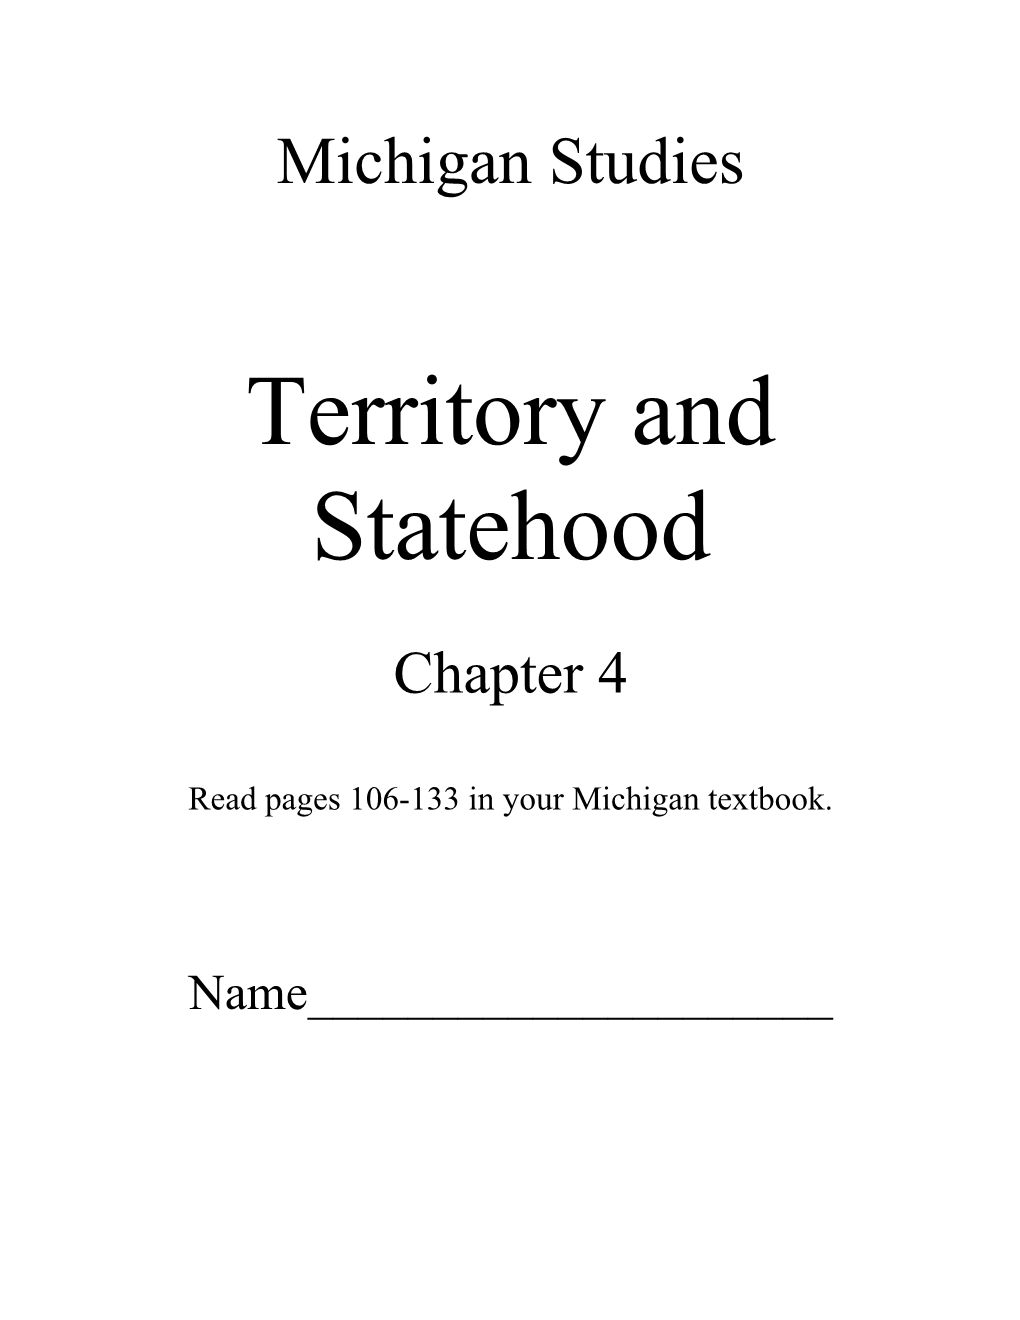 Read Pages 106-133 in Your Michigan Textbook